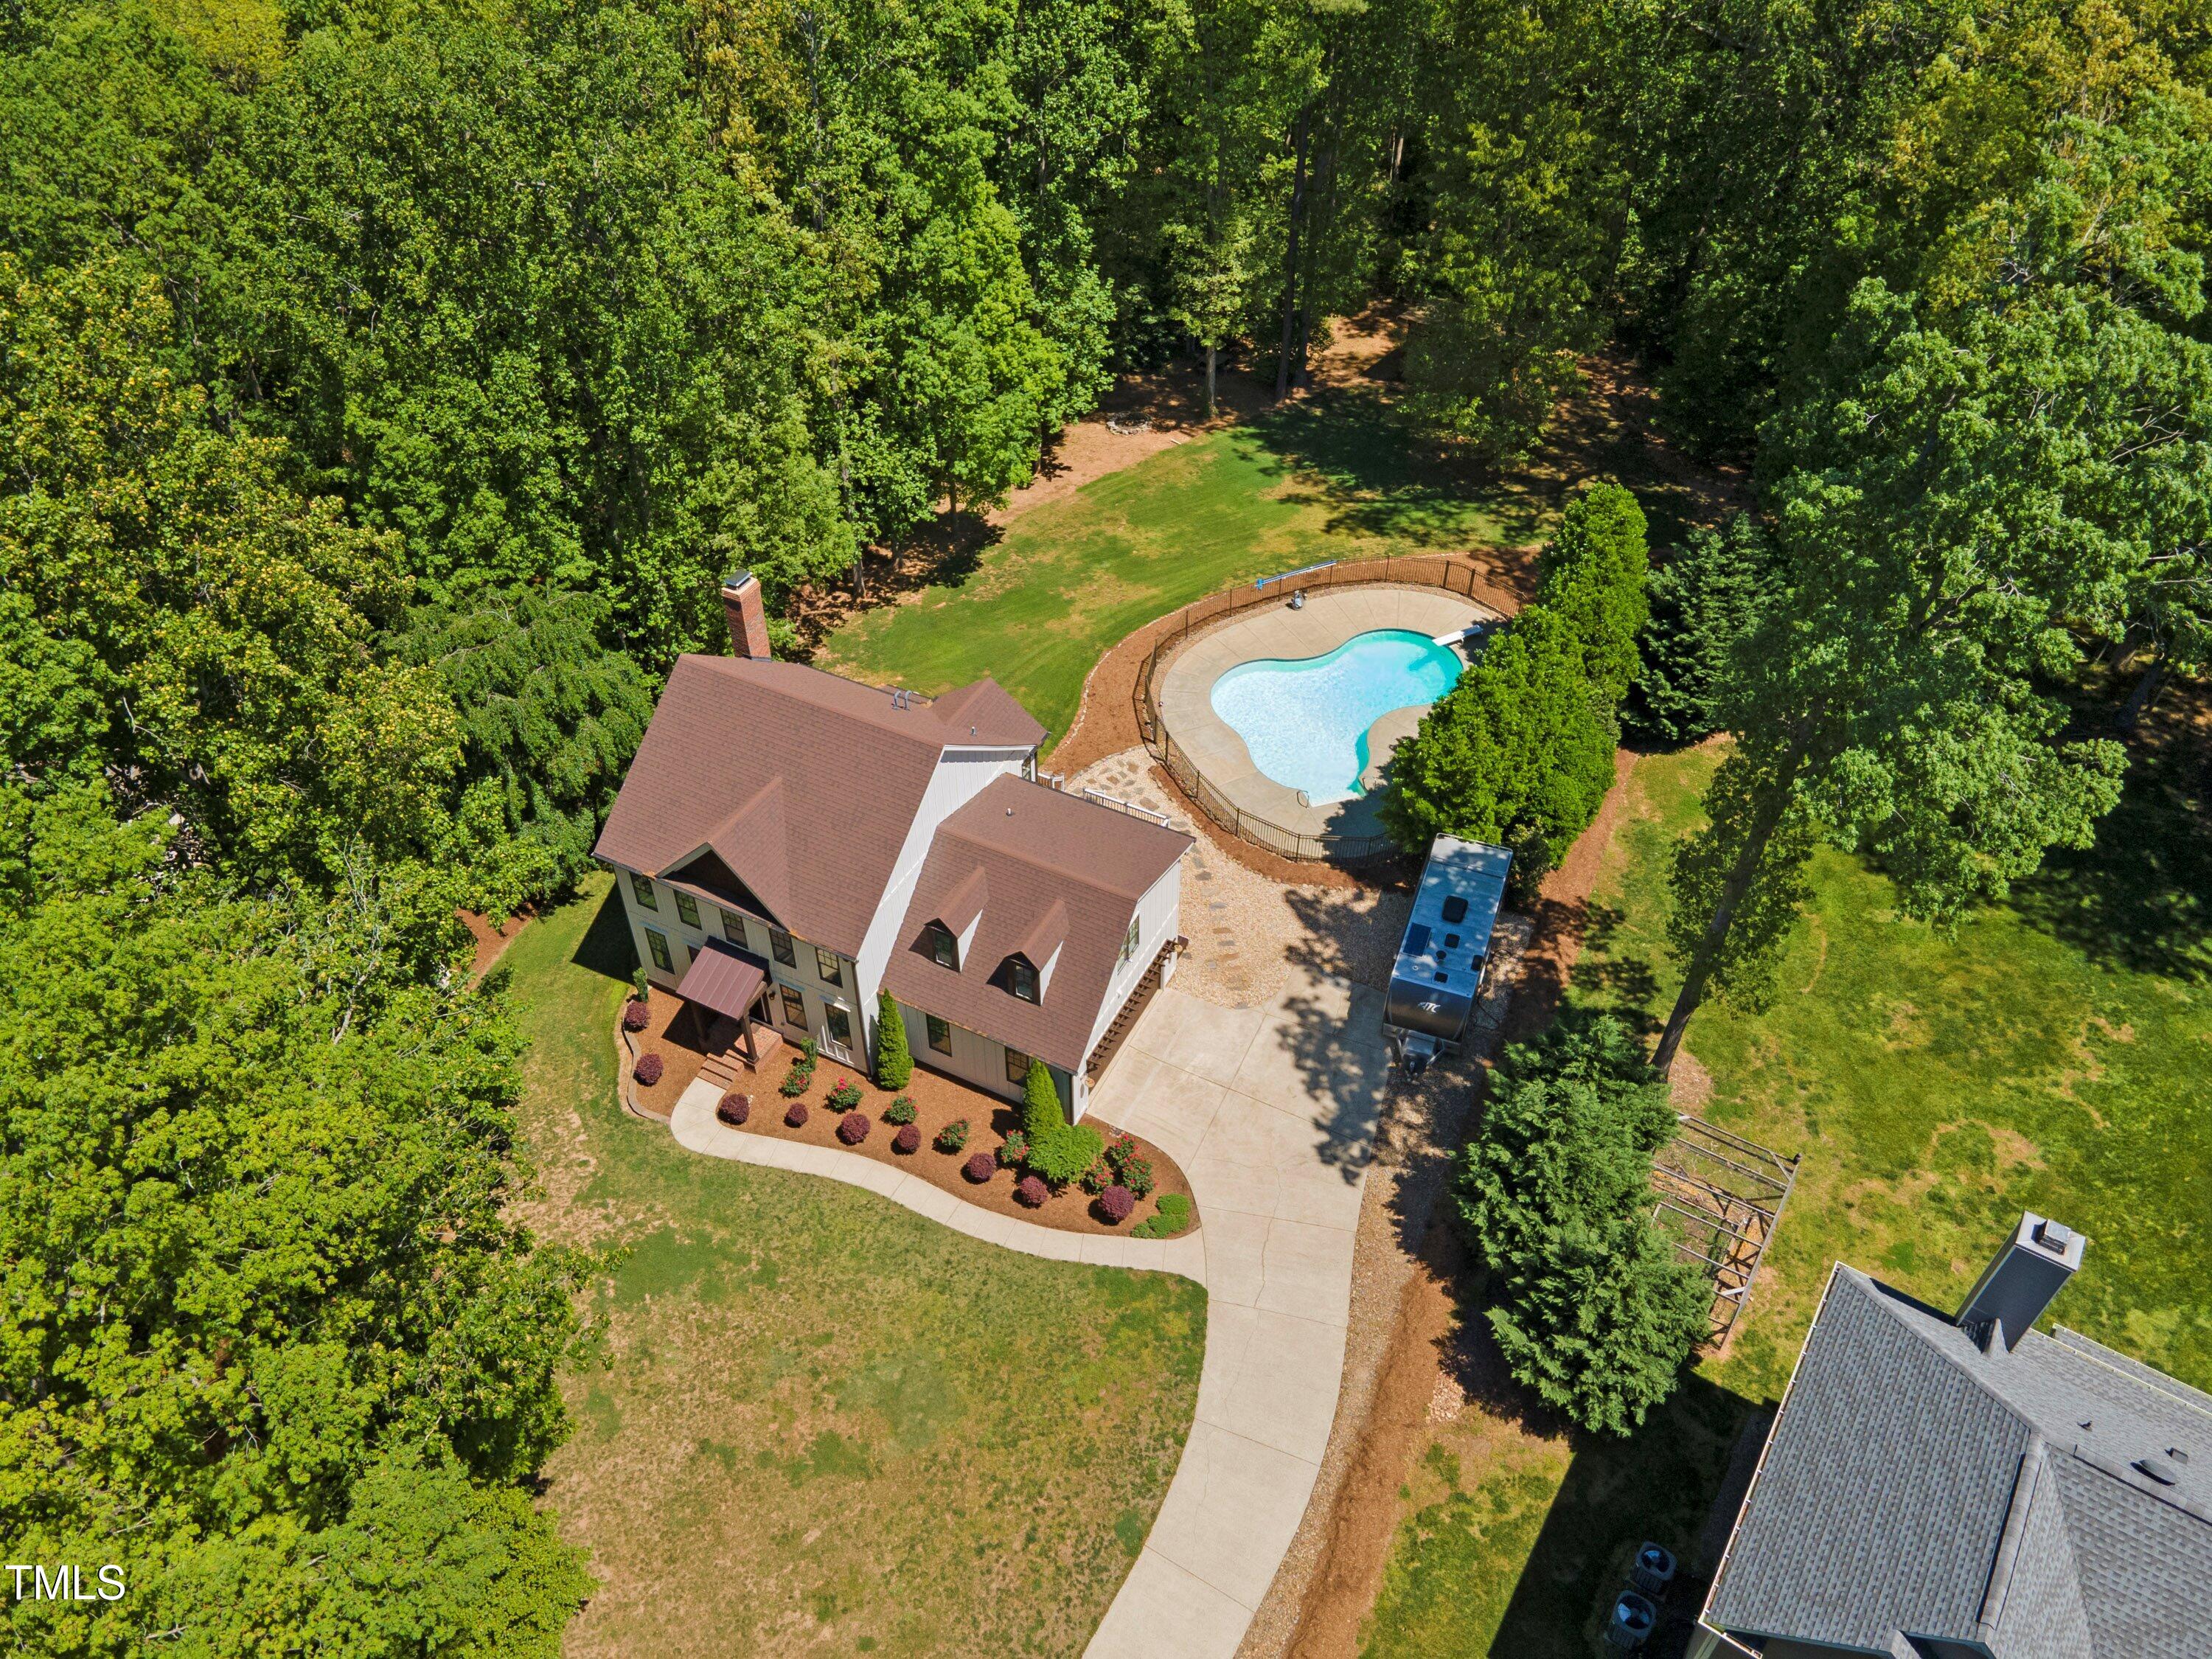 an aerial view of a house with a yard and trees